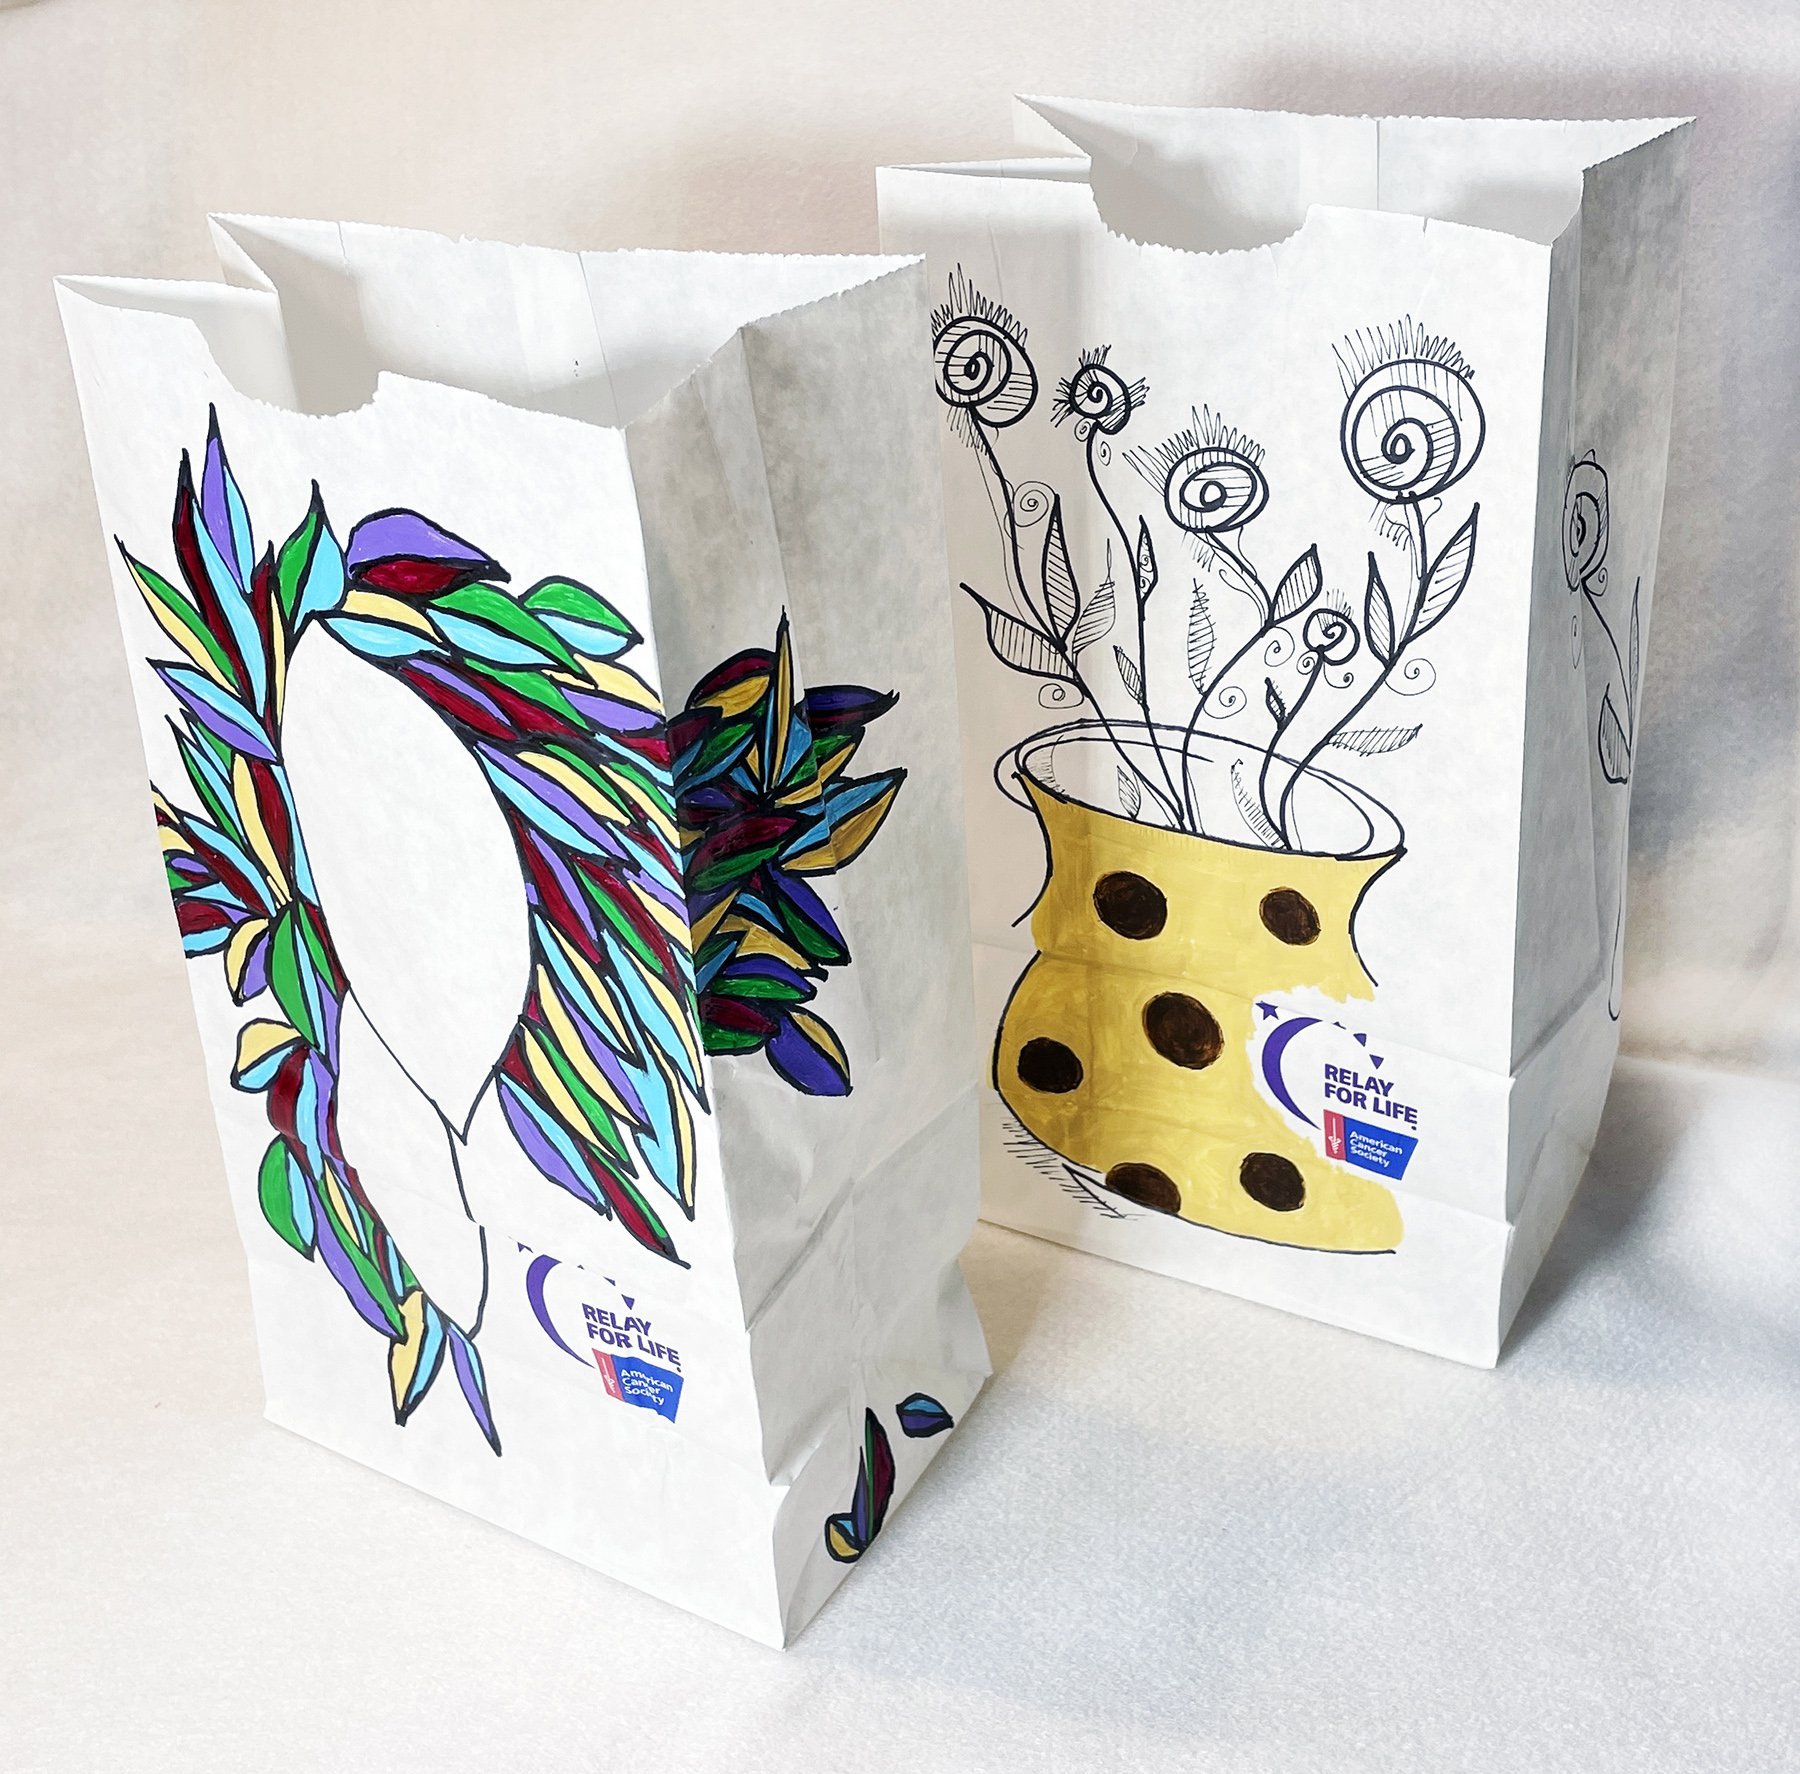 My Relay for Life luminaria bags | Relay for life, Luminaries bags, Relay